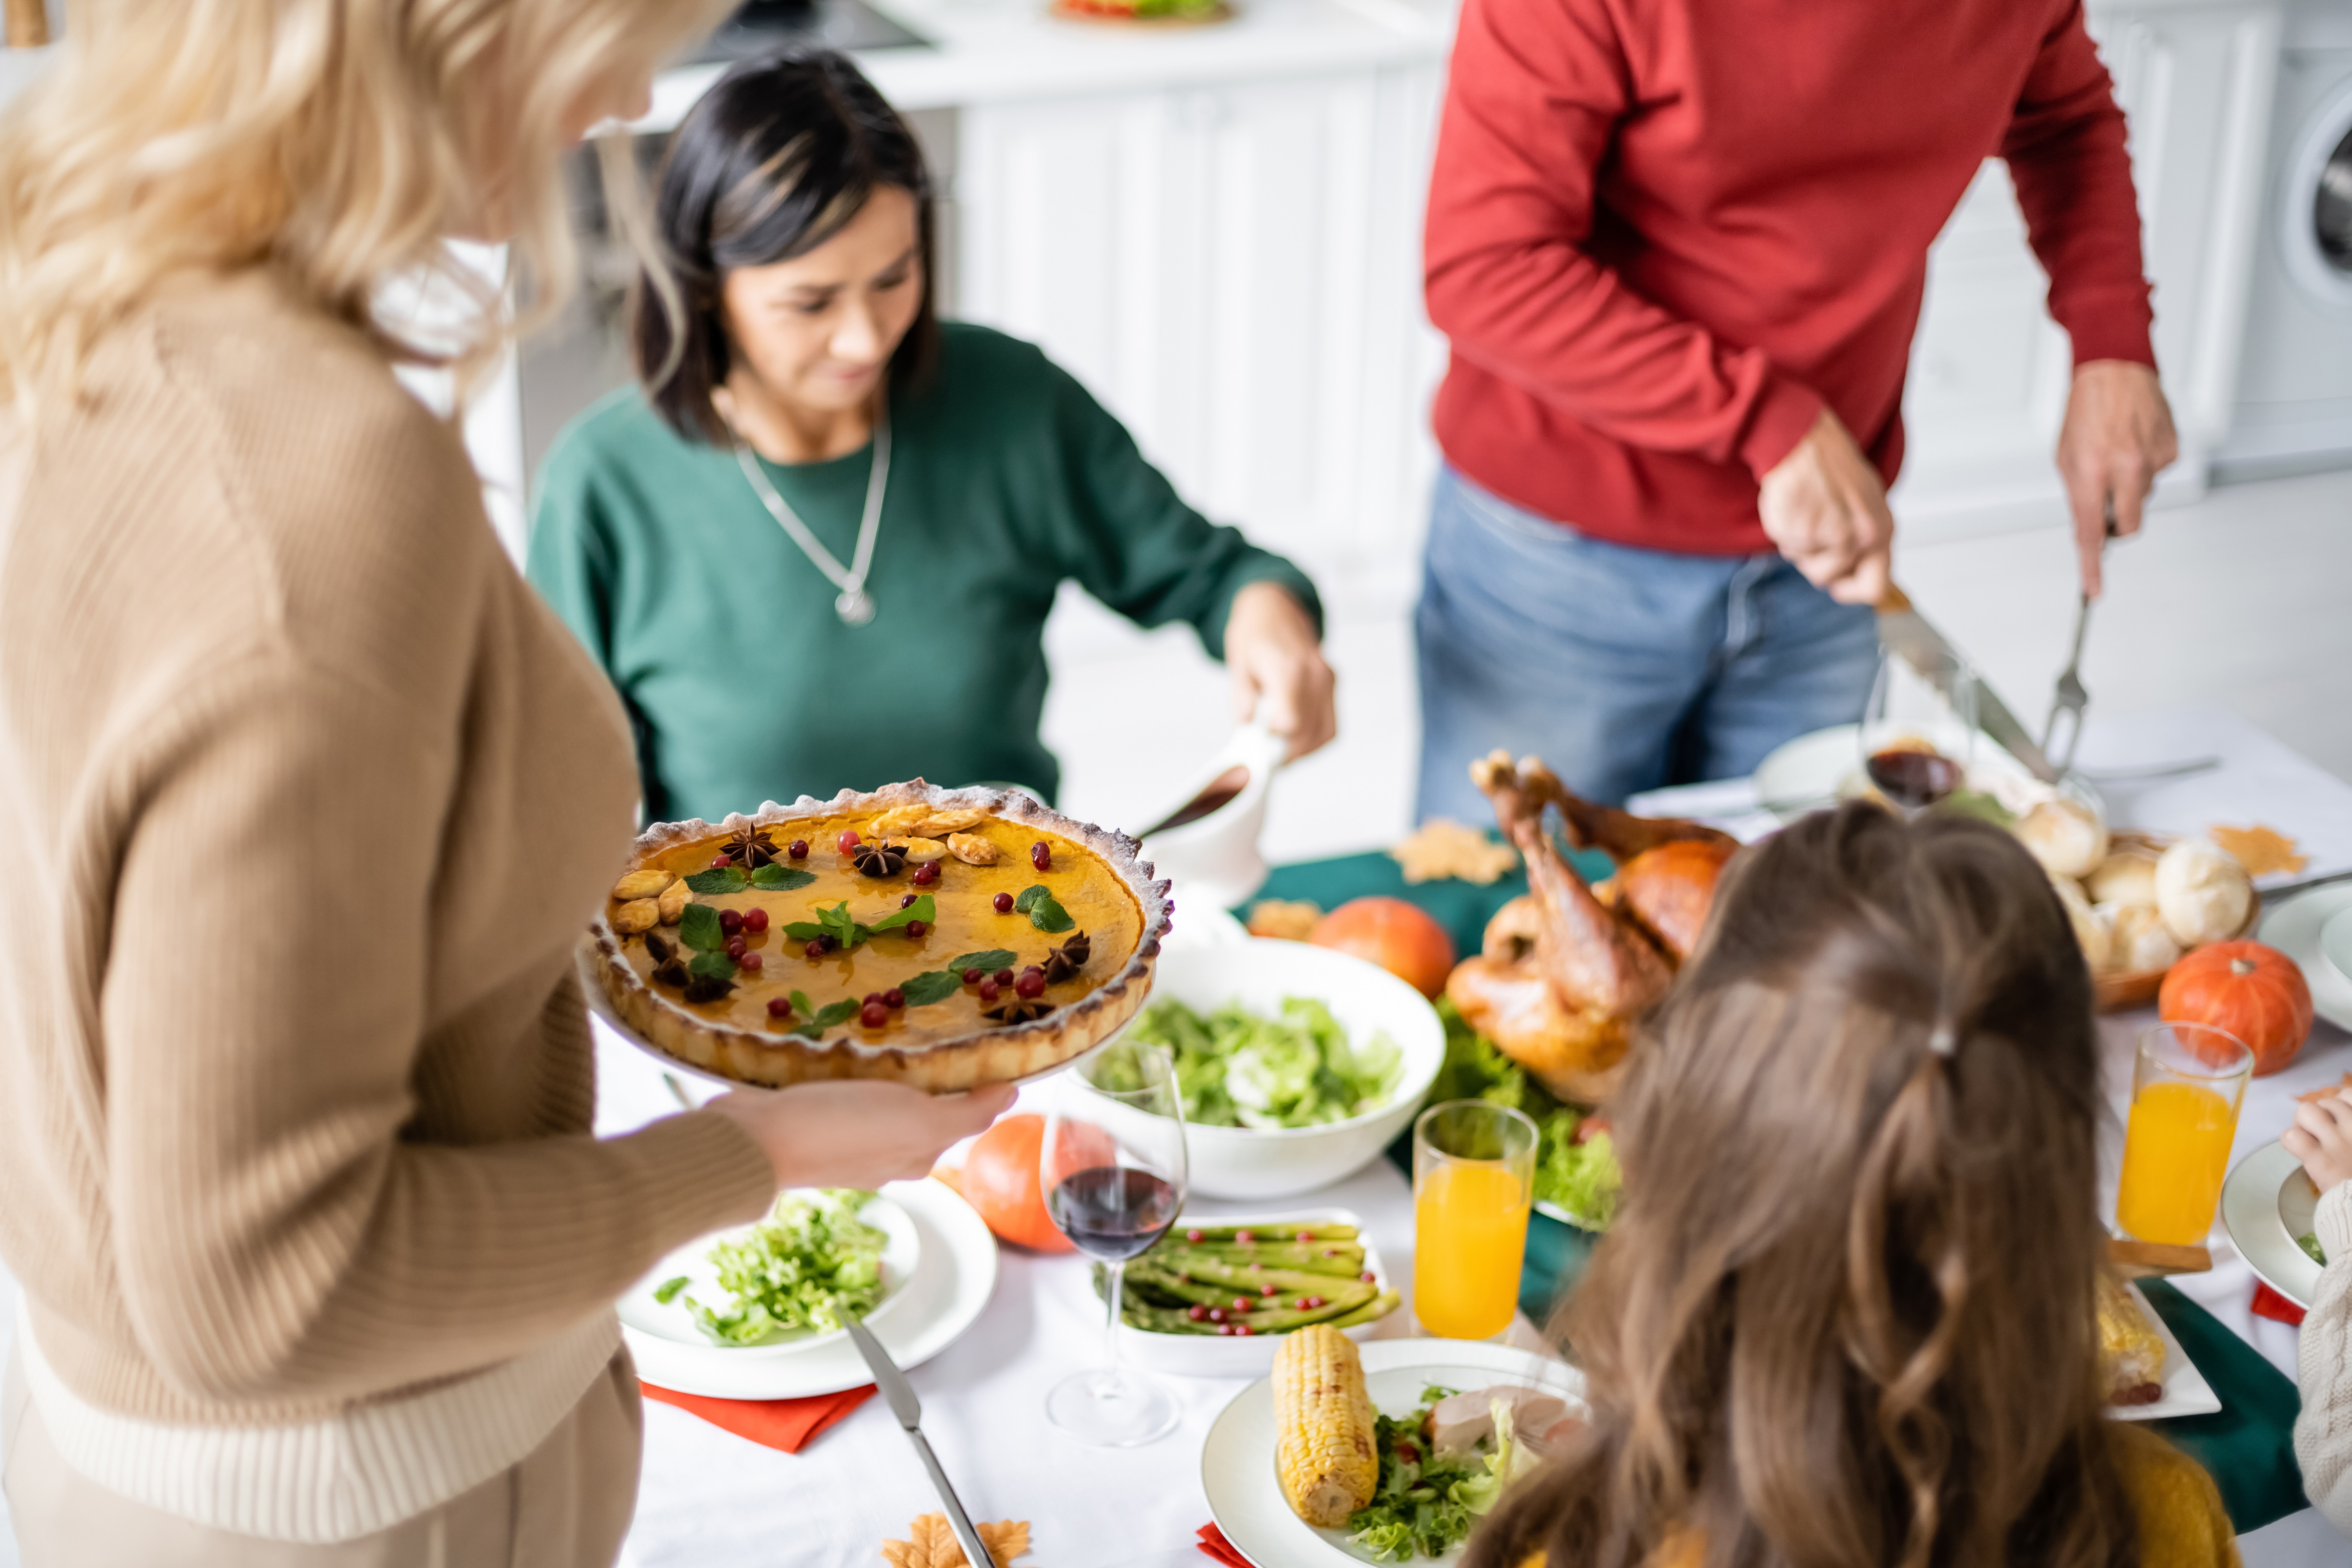 4 Ways to Host an Inclusive Holiday Celebration